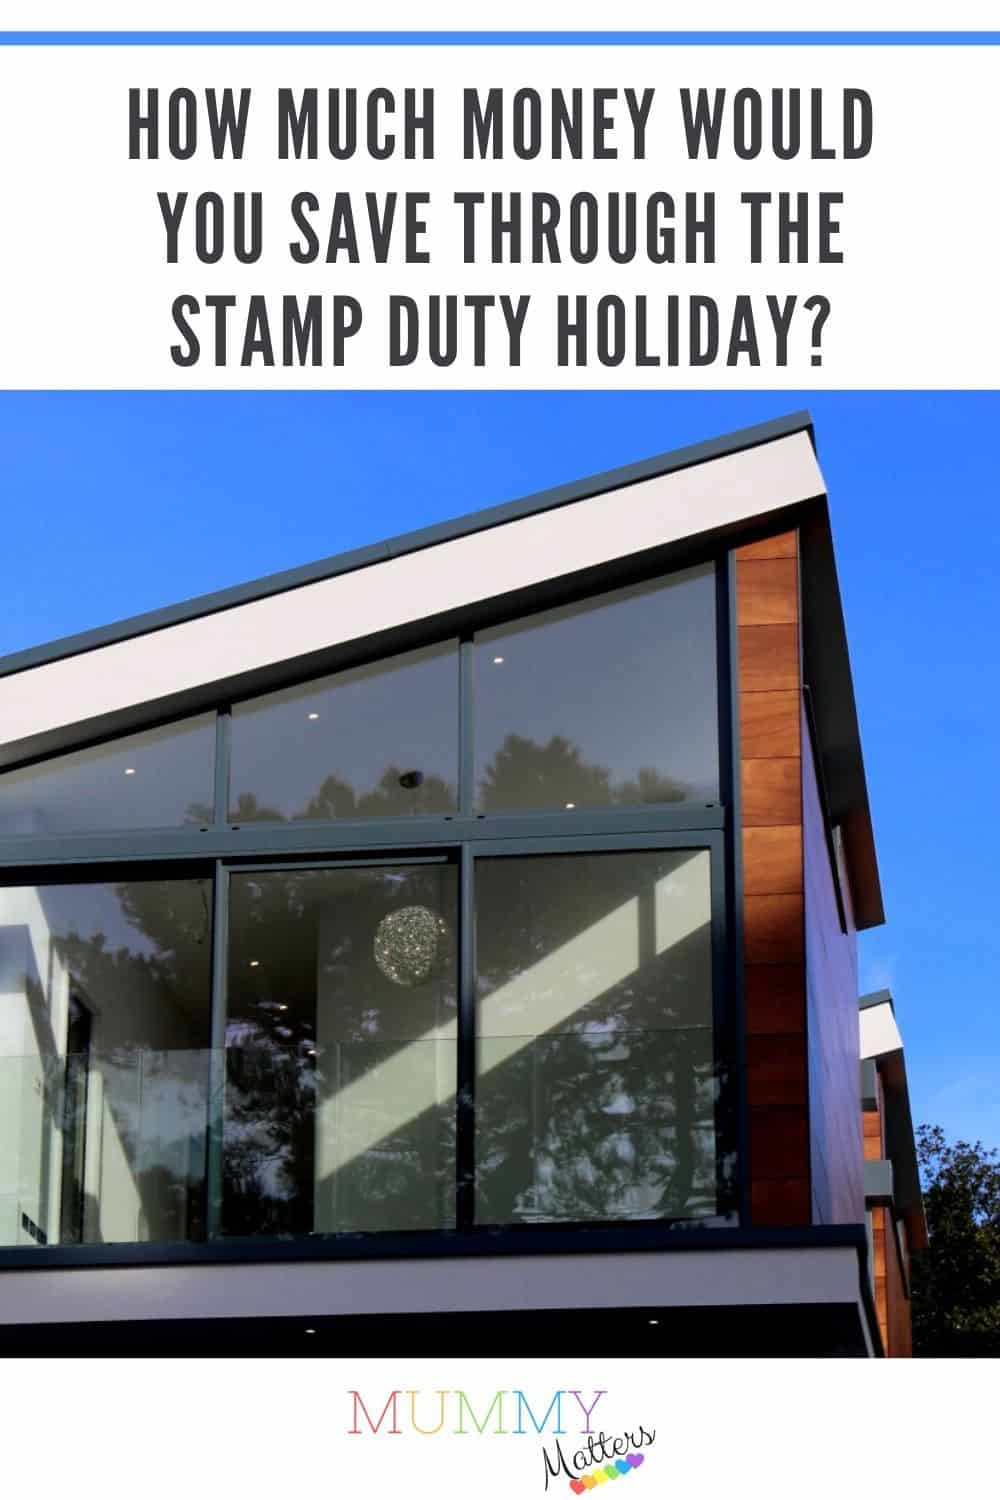 Stamp duty is a devolved matter in Scotland and Wales. So how will Stamp Duty Holiday affect people who plan to move in the coming months? Read on to find out.